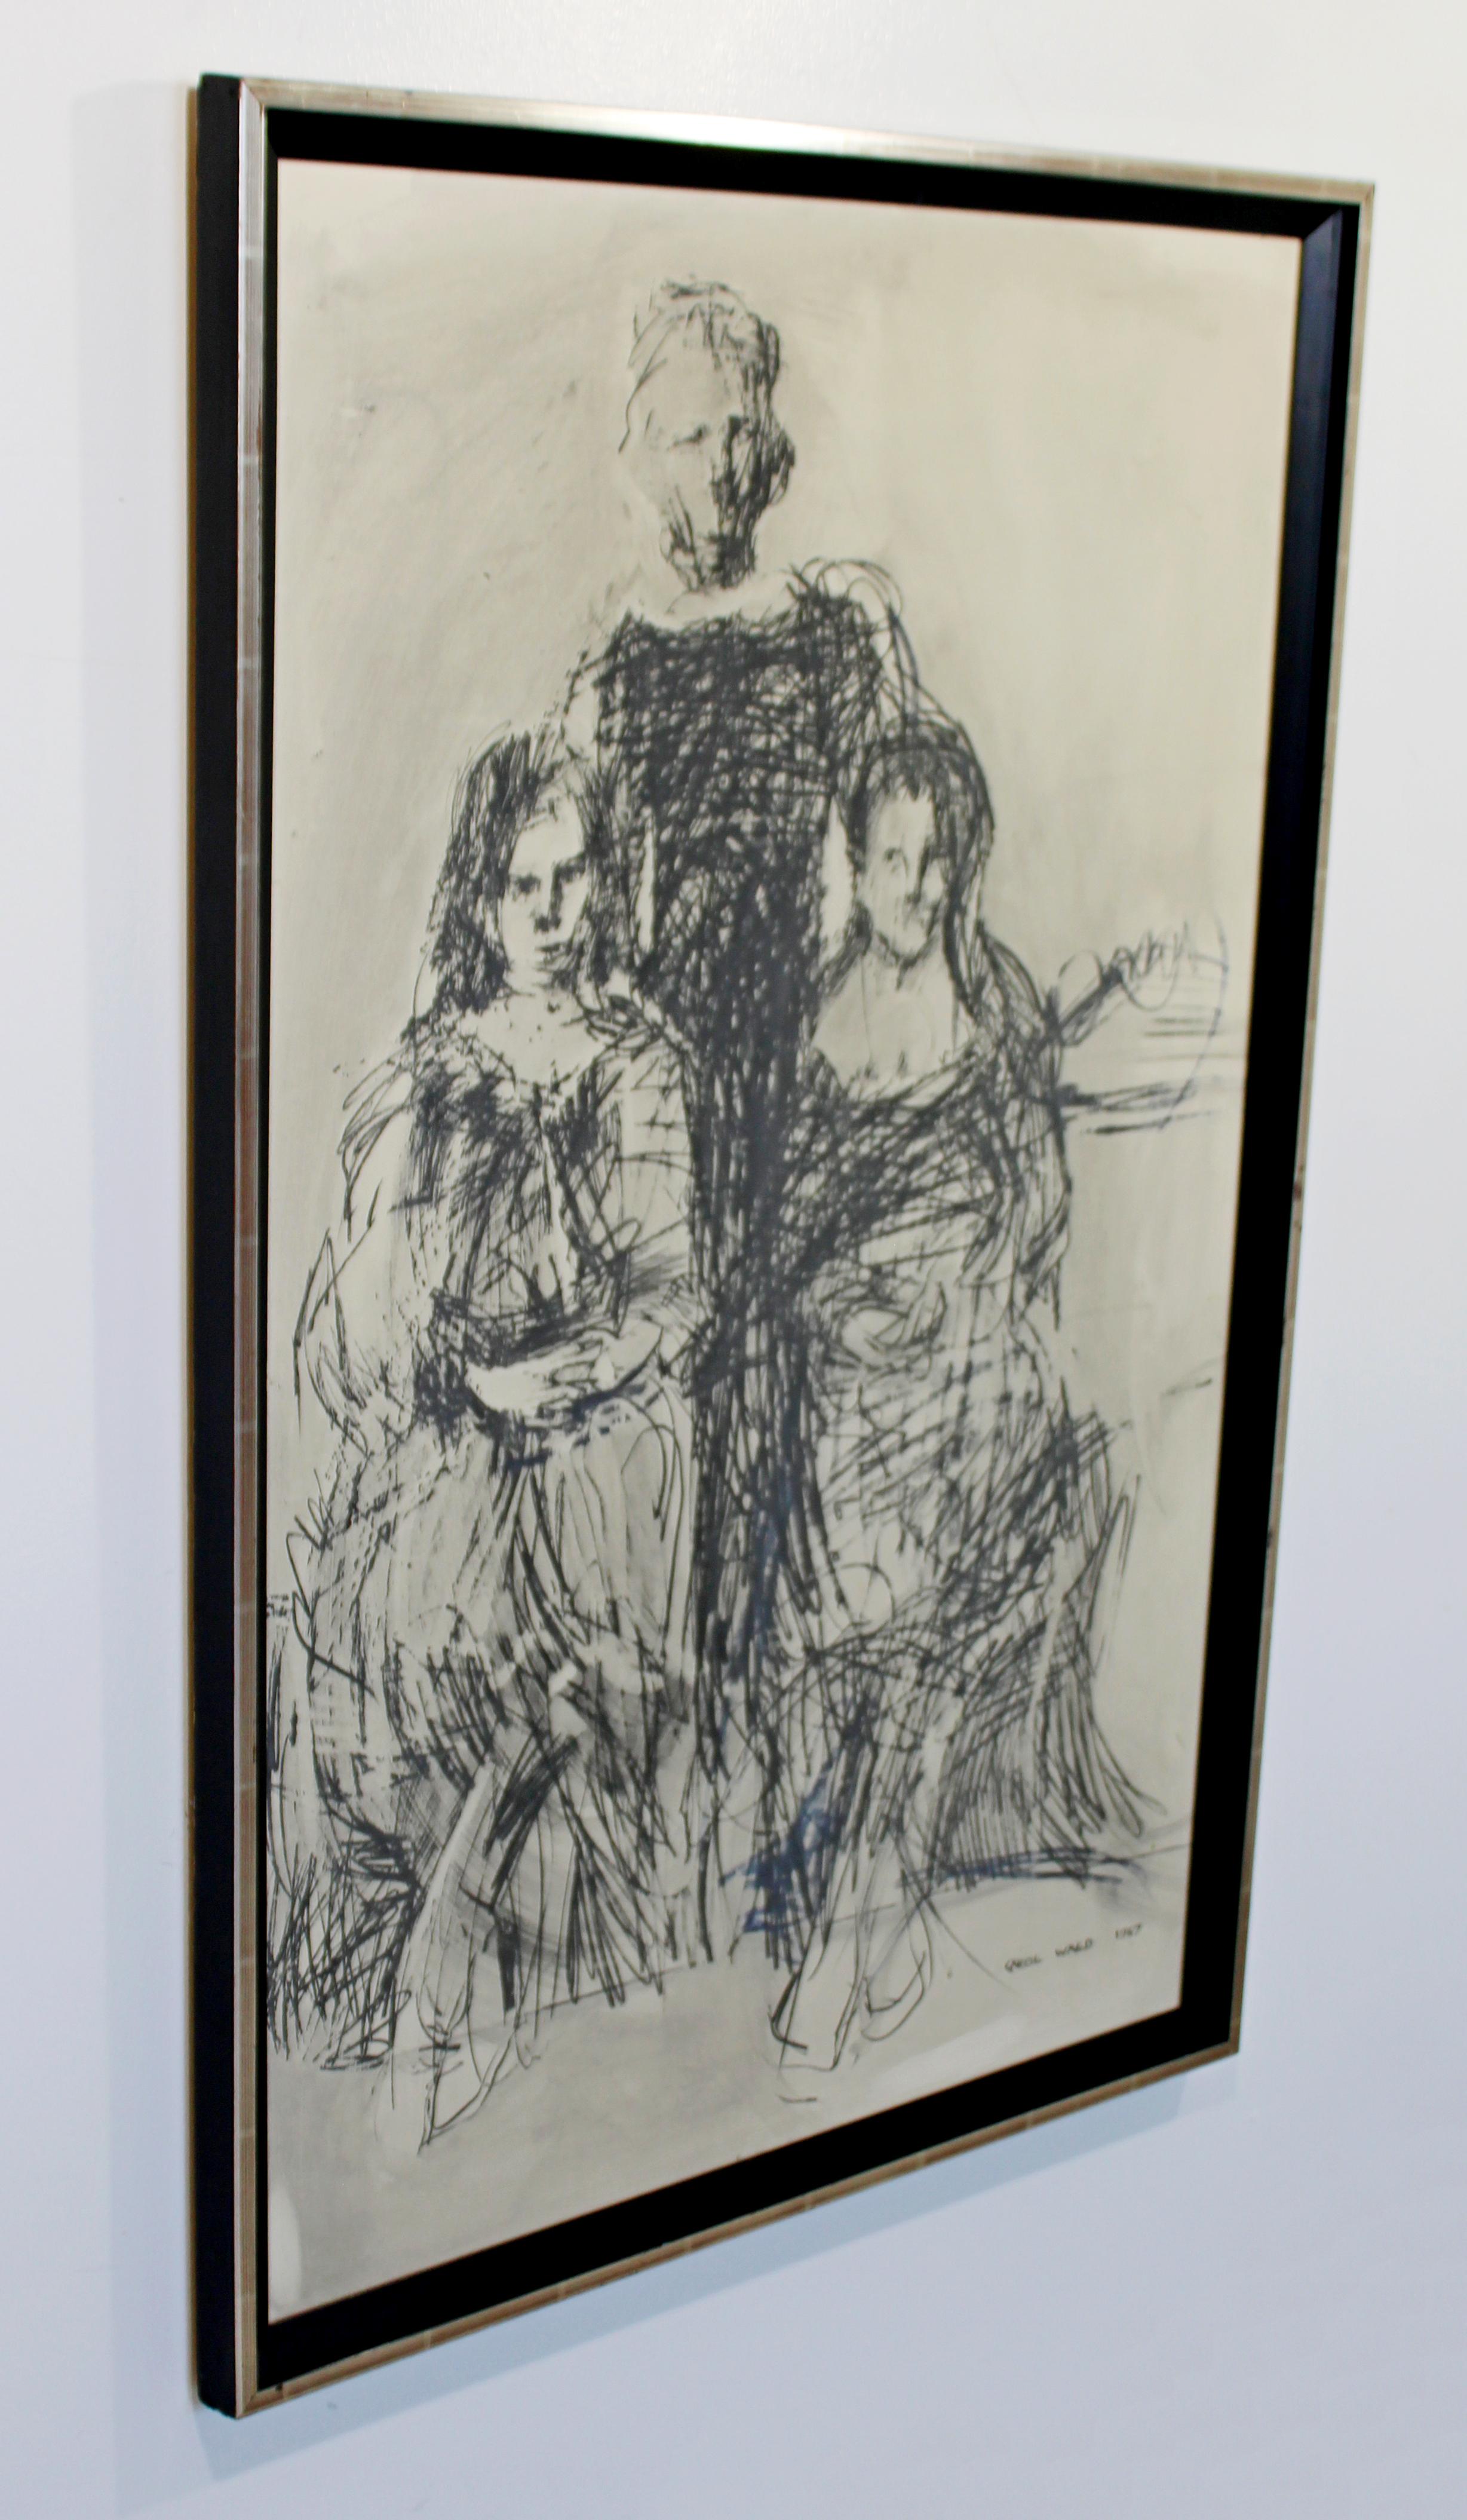 For your consideration is a striking, framed original drawing down in charcoal, signed by Carol Wald, dated 1967. In excellent condition. The dimensions are 28.25